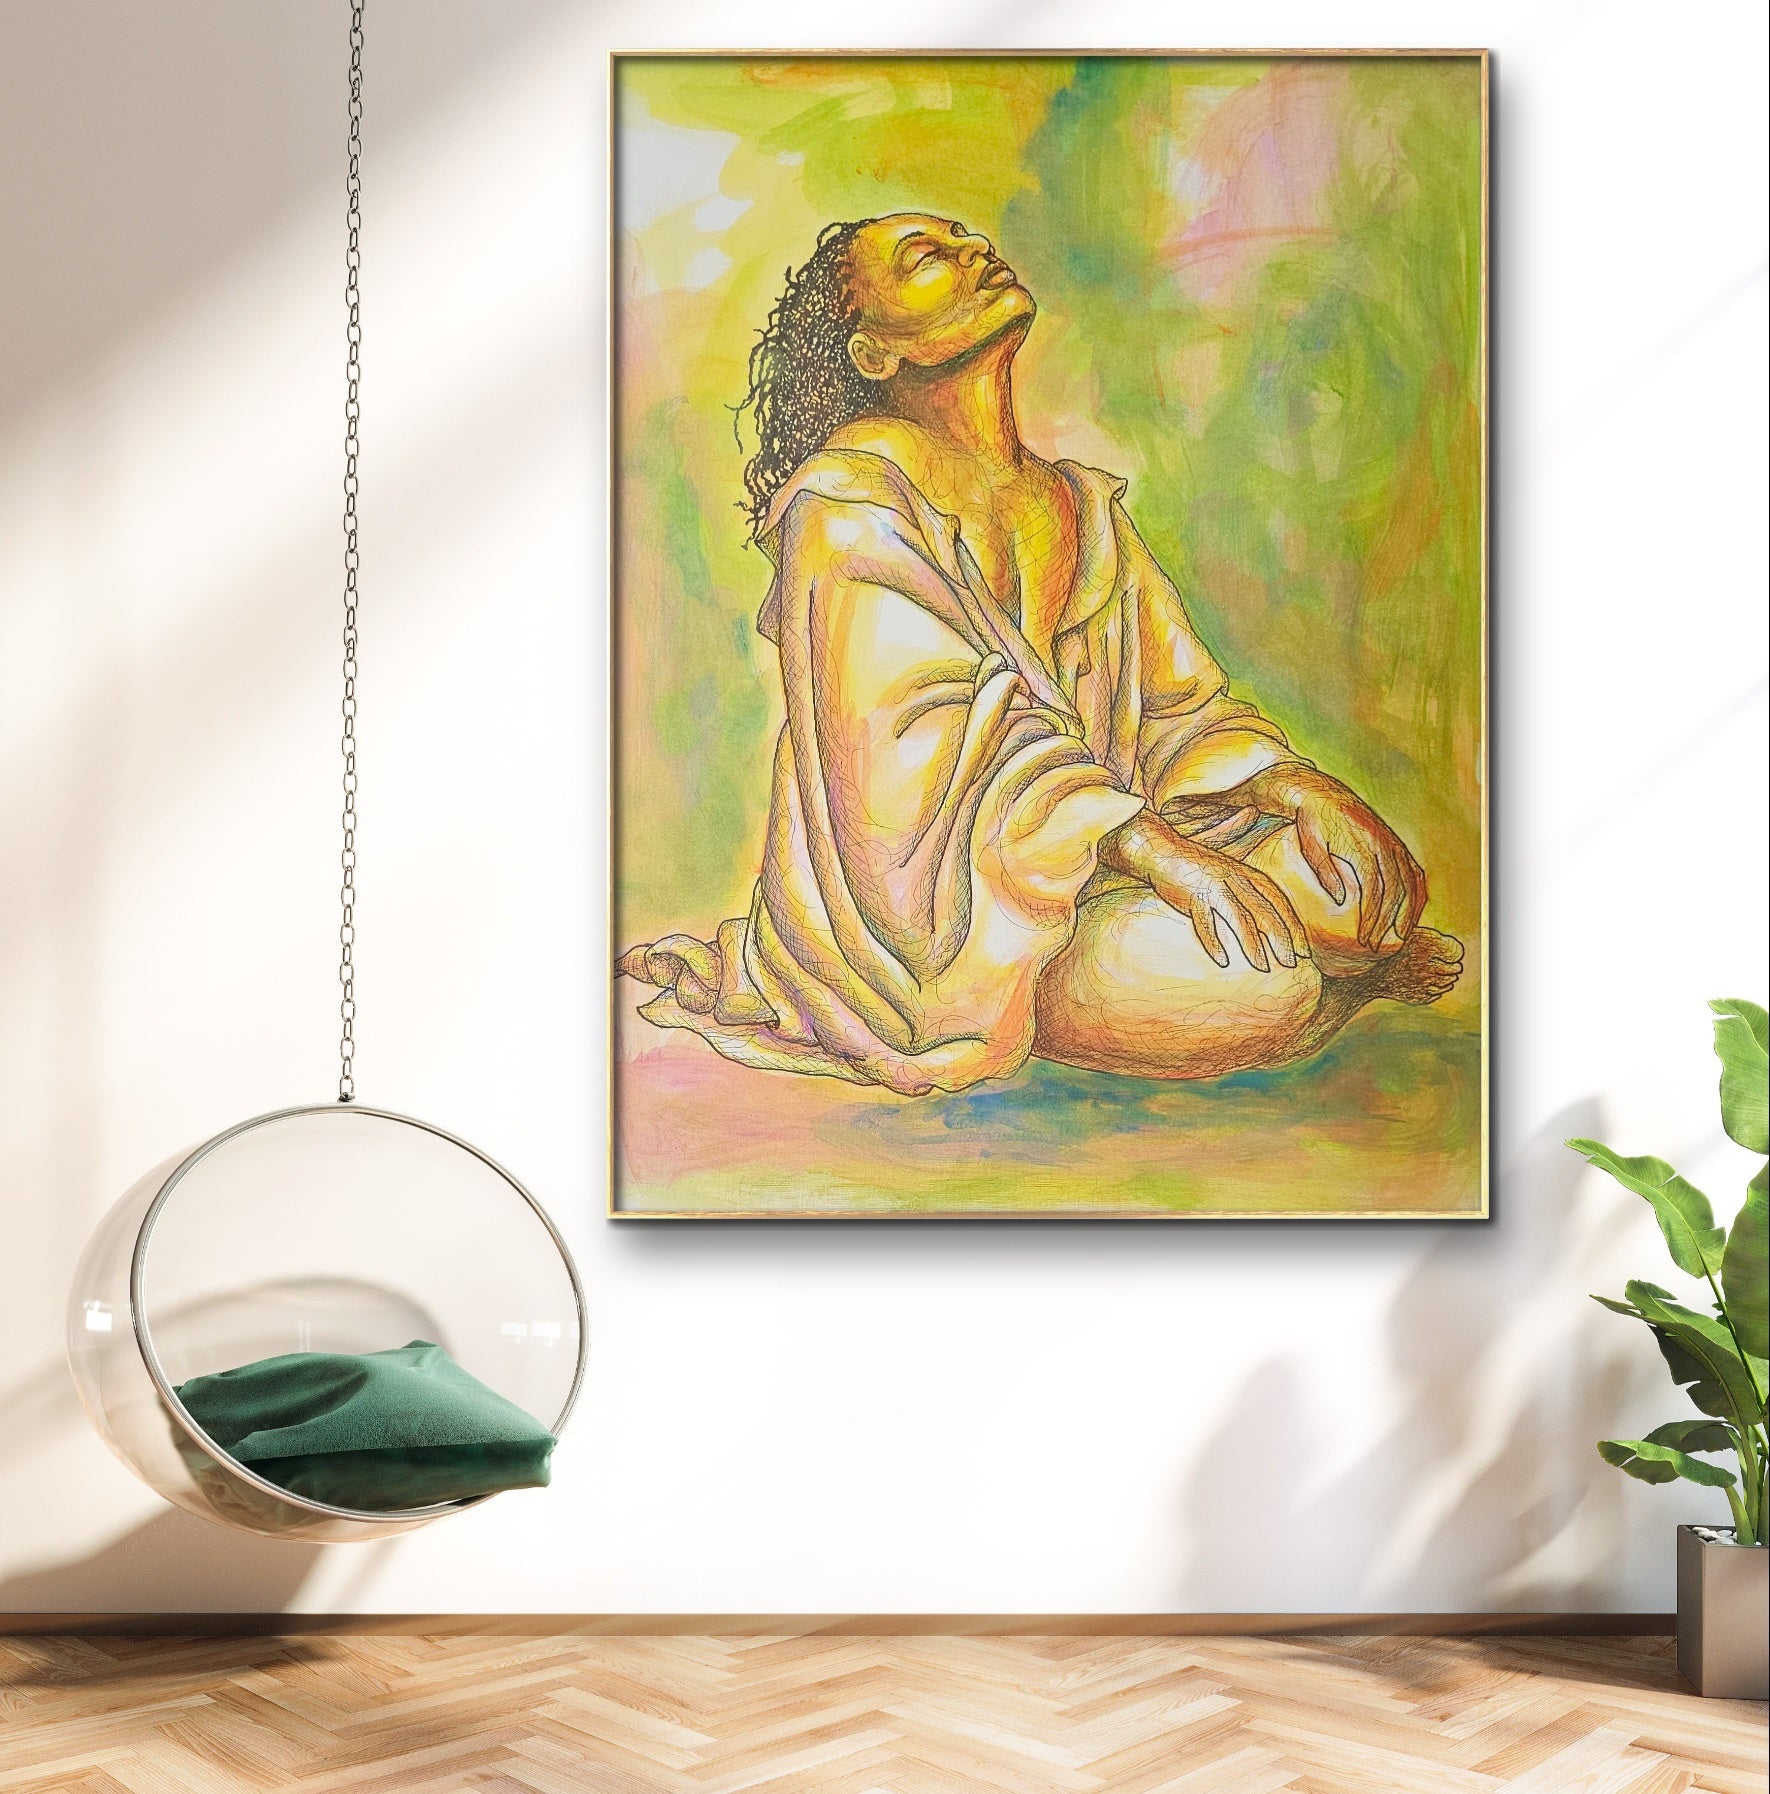 At Peace #2 Giclee on Canvas